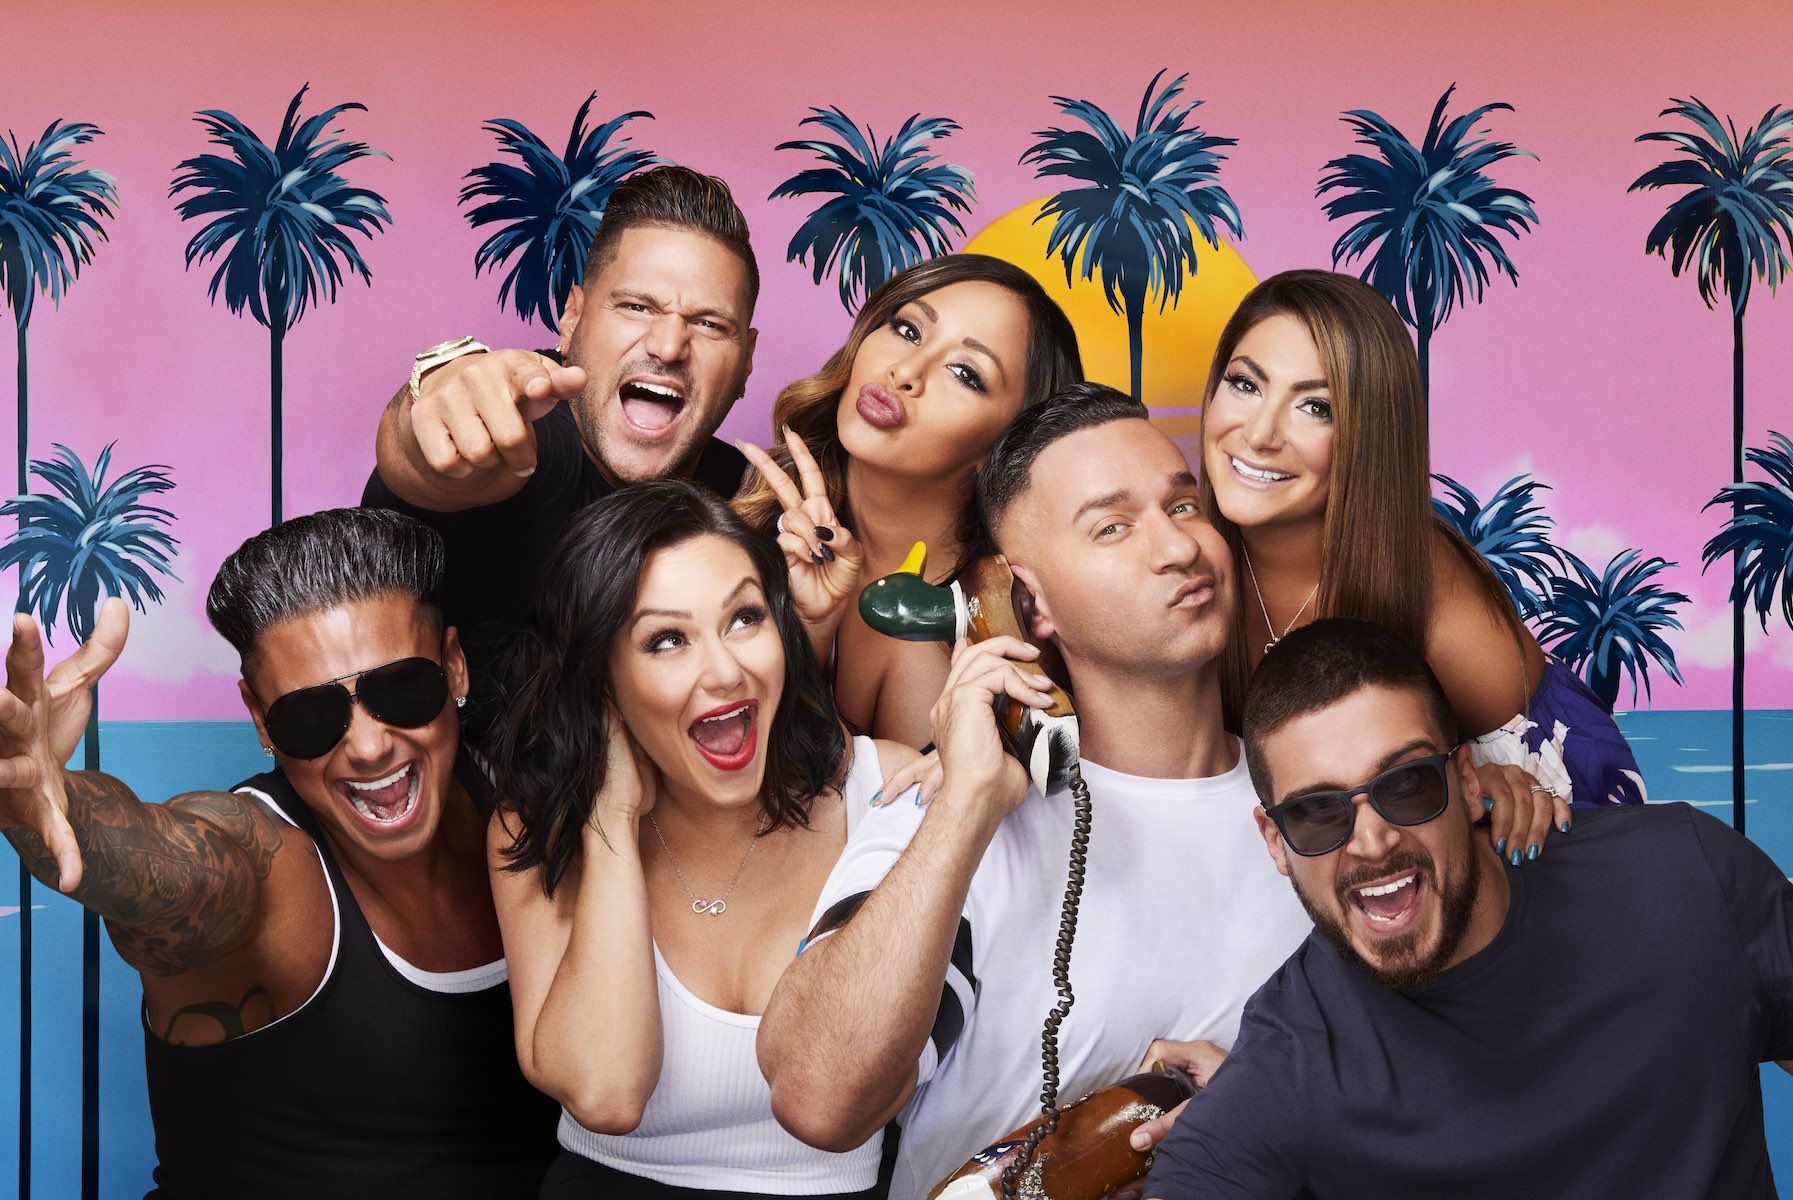 Jersey Shore: Family Vacation': What 